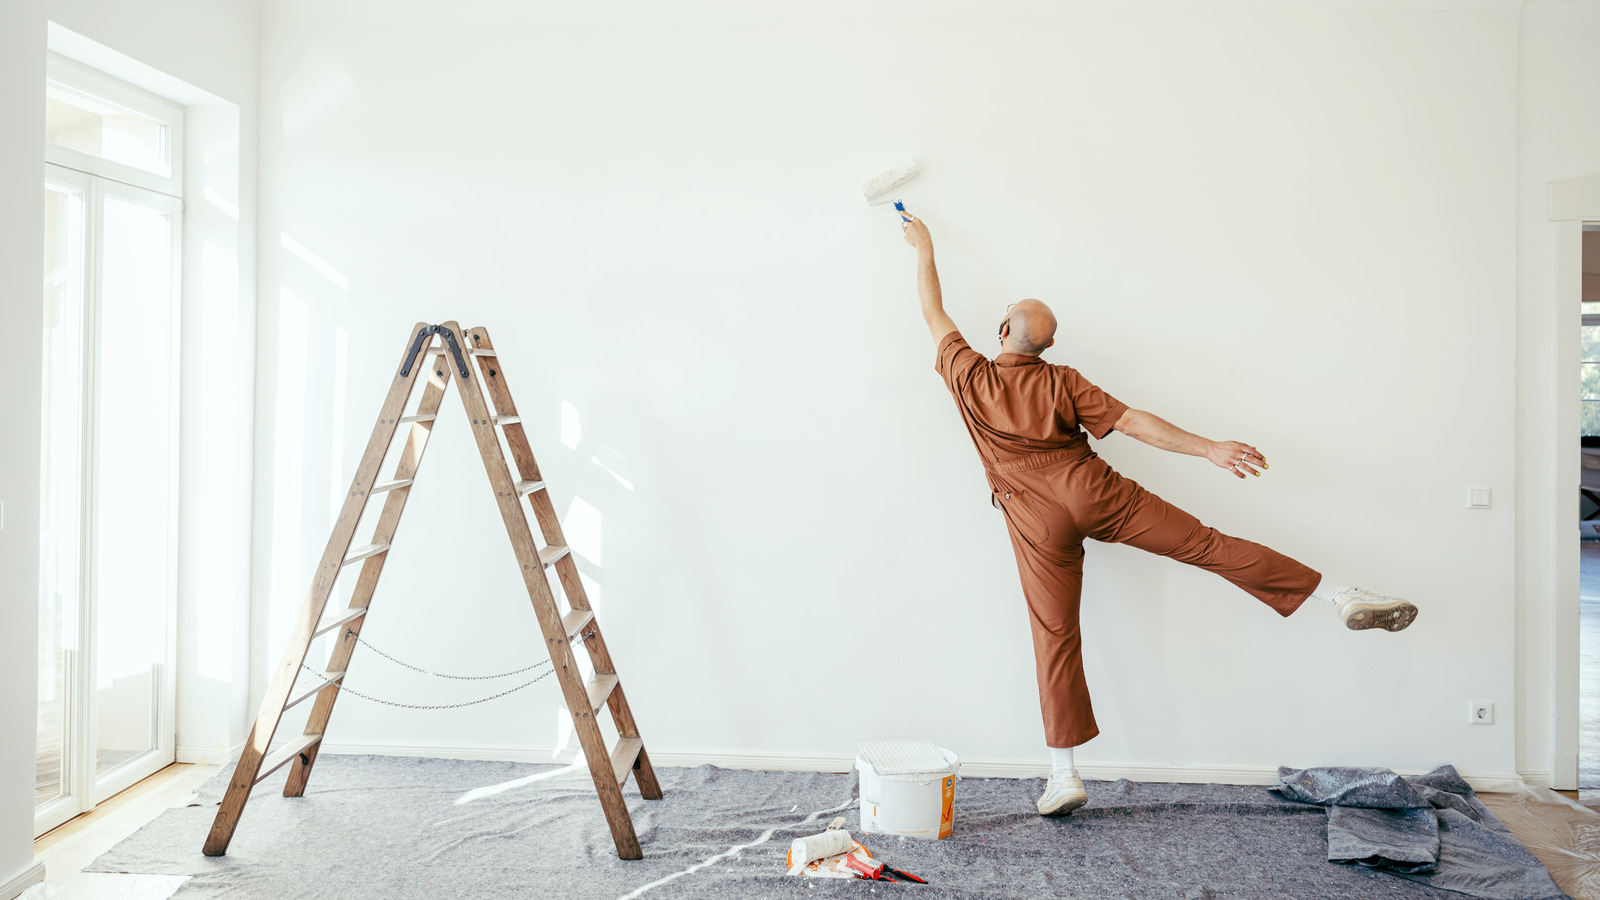 What you need to know about painting your walls white